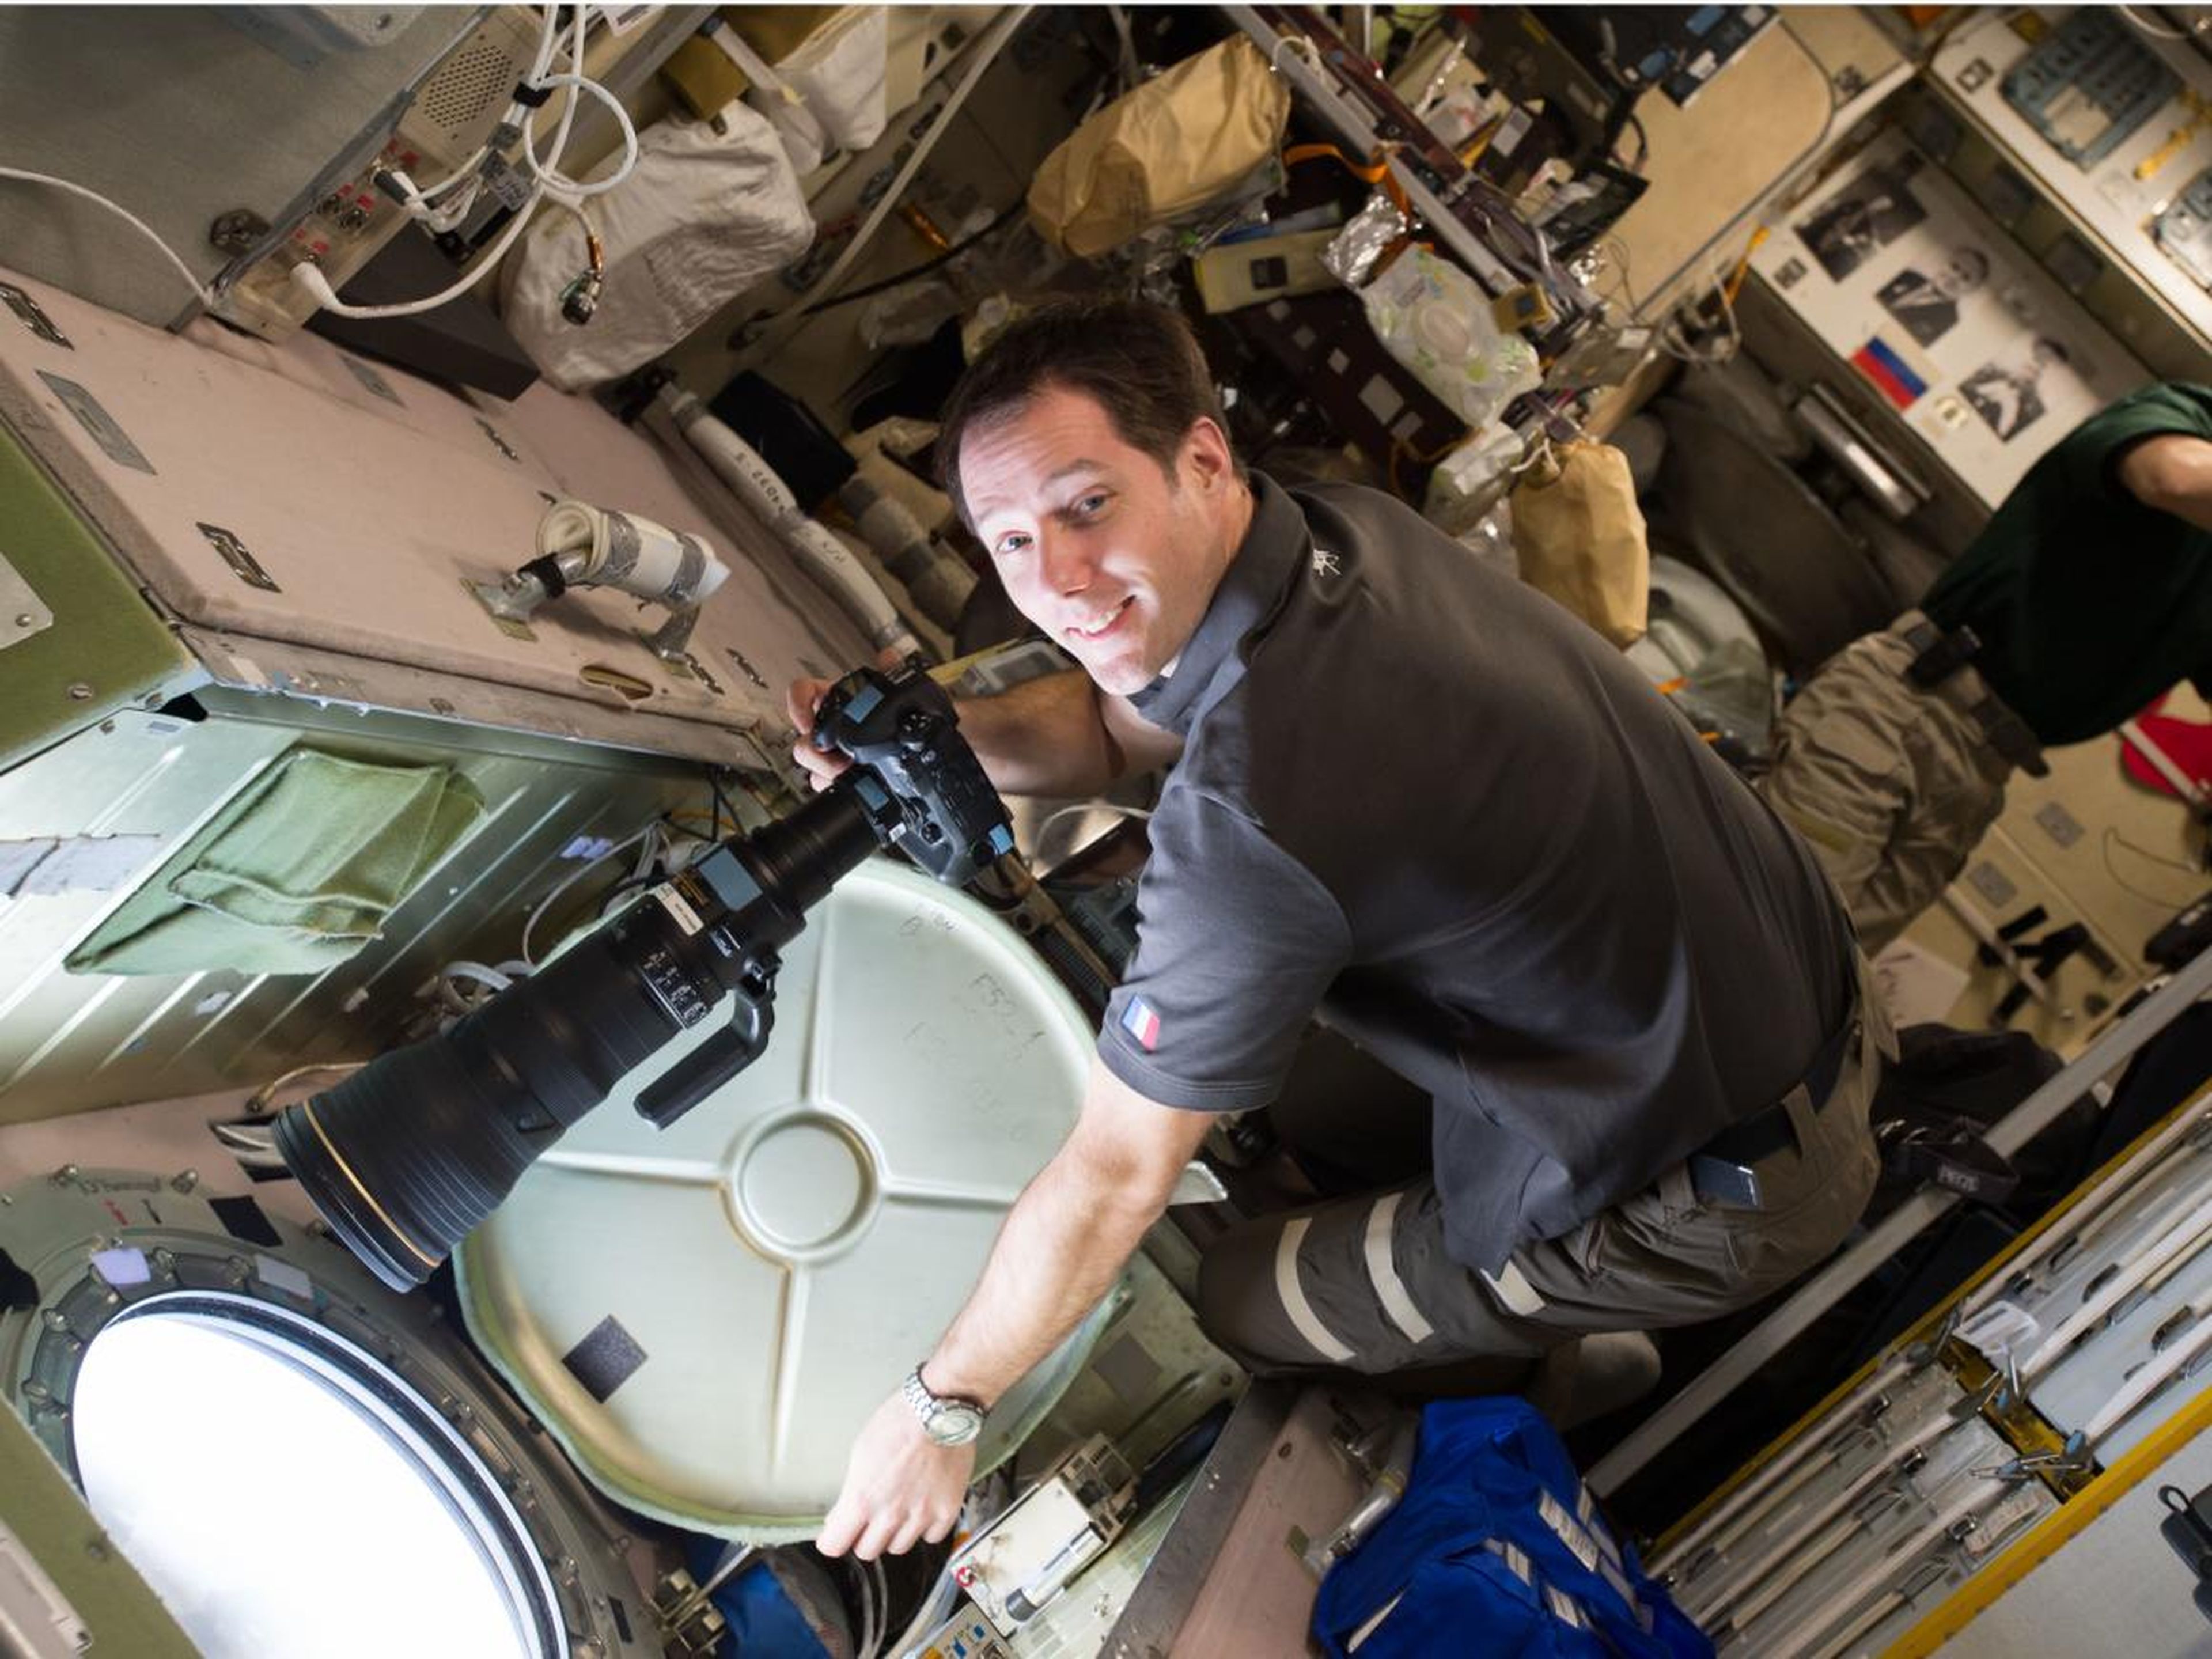 European Space Agency astronaut Thomas Pesquet preparing to take Crew Earth Observations photos from the Service Module window in December 2016.